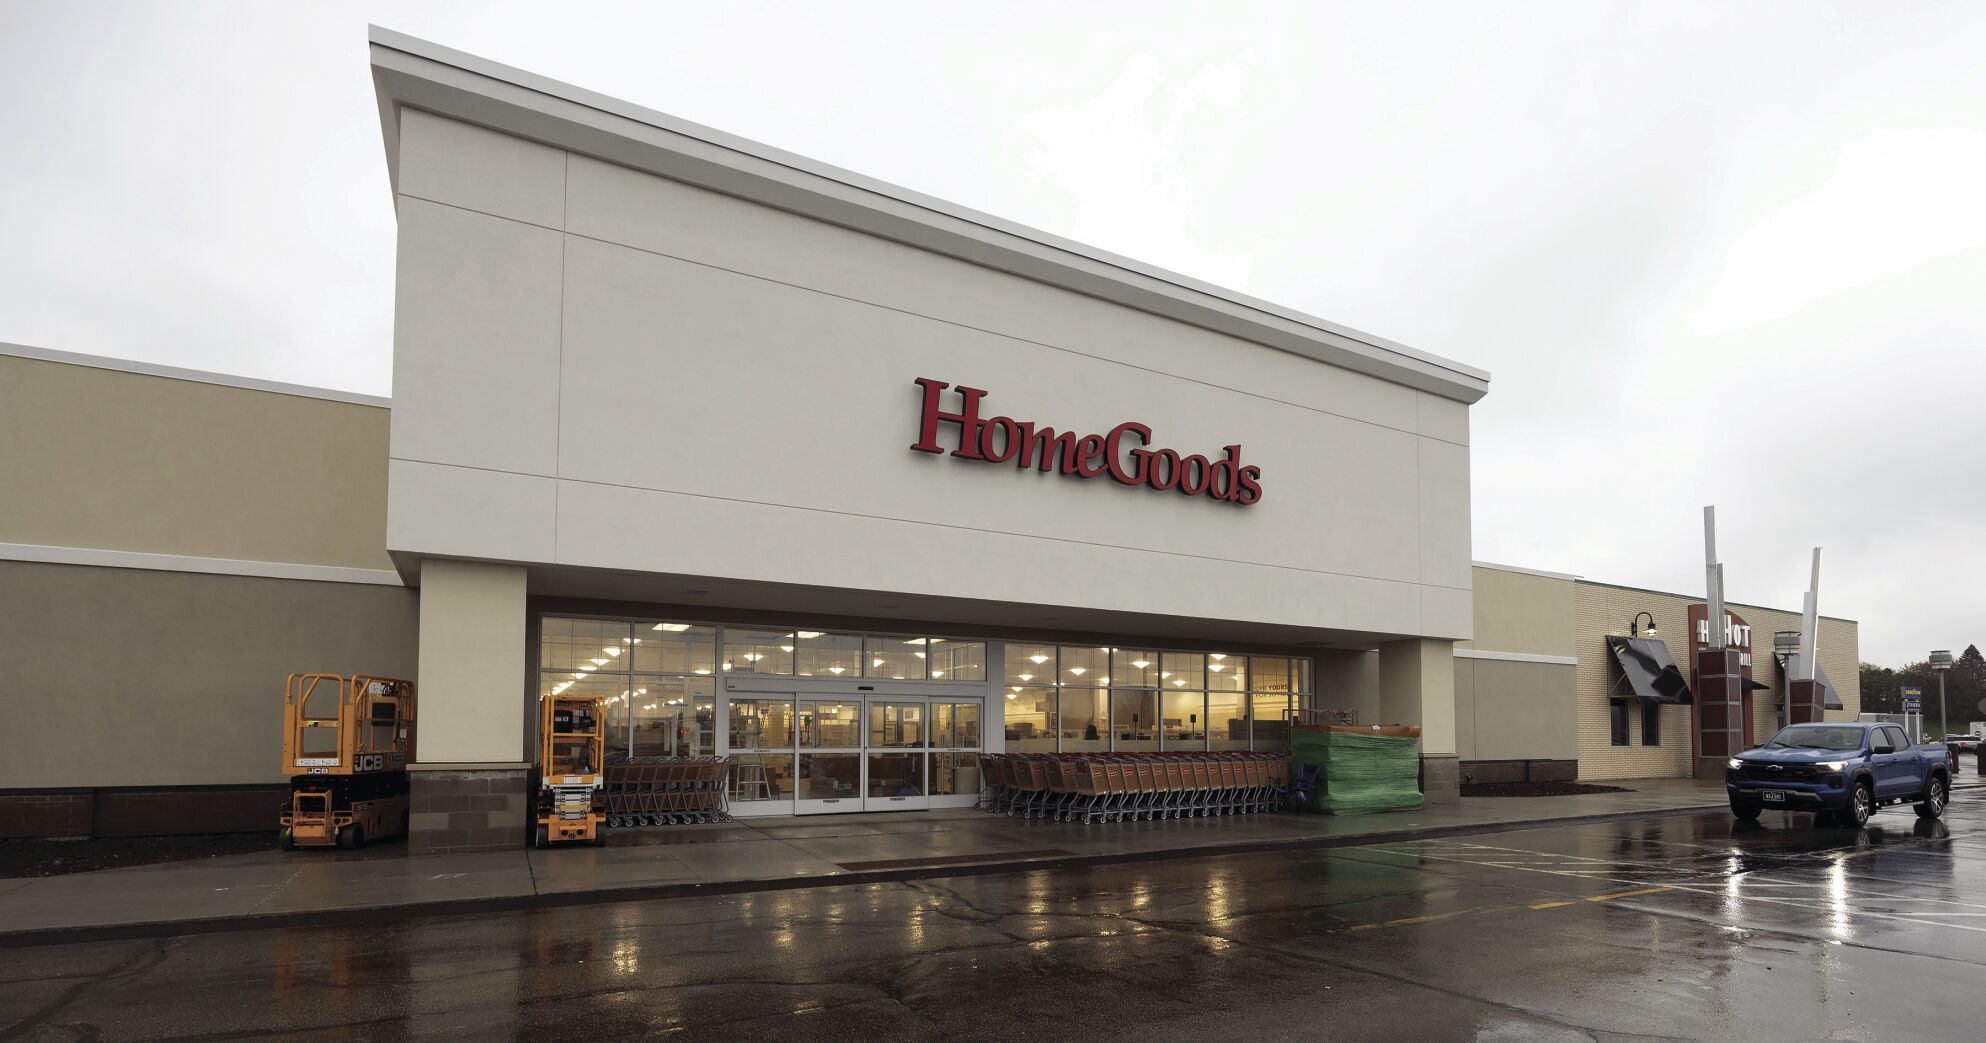 HomeGoods is set to open its Dubuque location on May 9 at Kennedy Mall.    PHOTO CREDIT: Stephen Gassman